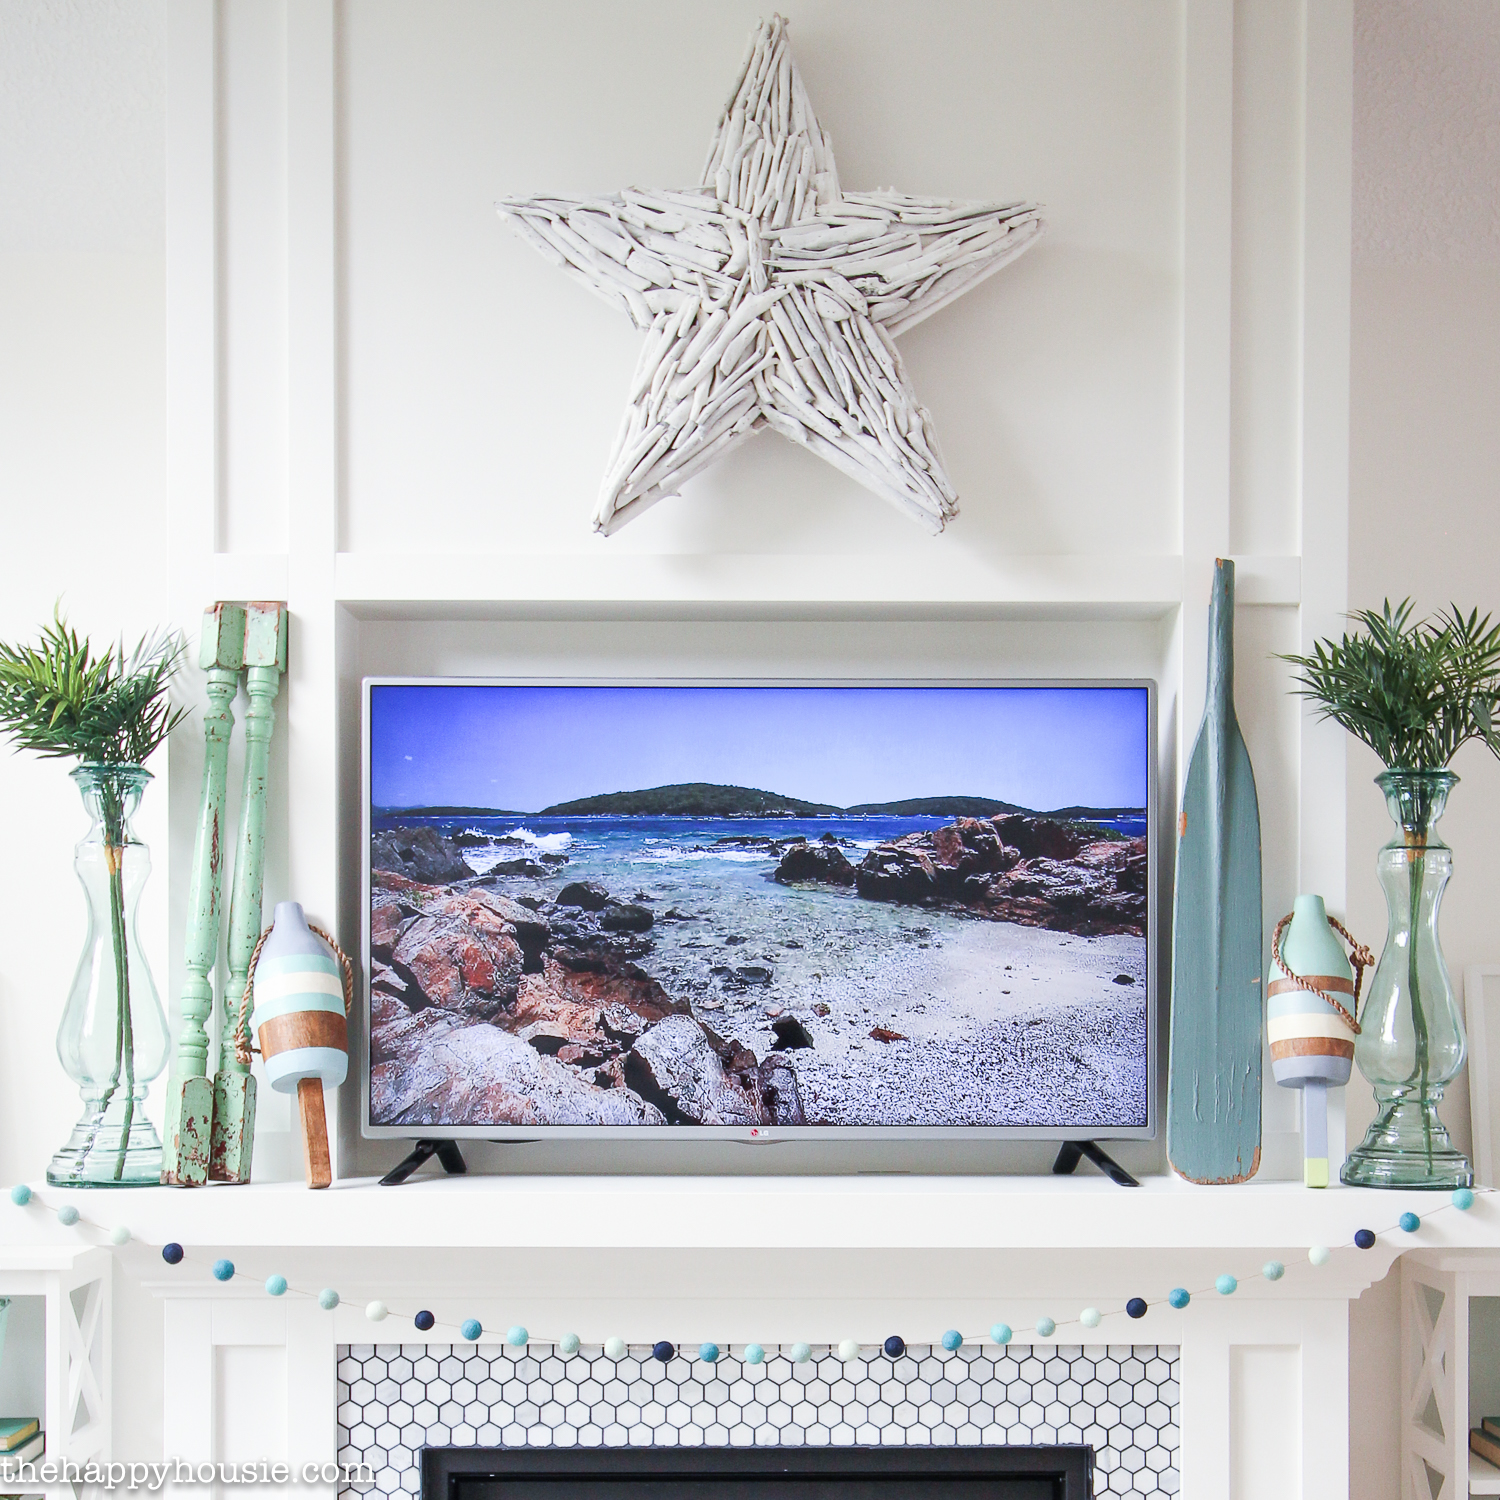 A white fireplace mantel with beachy decor on it.